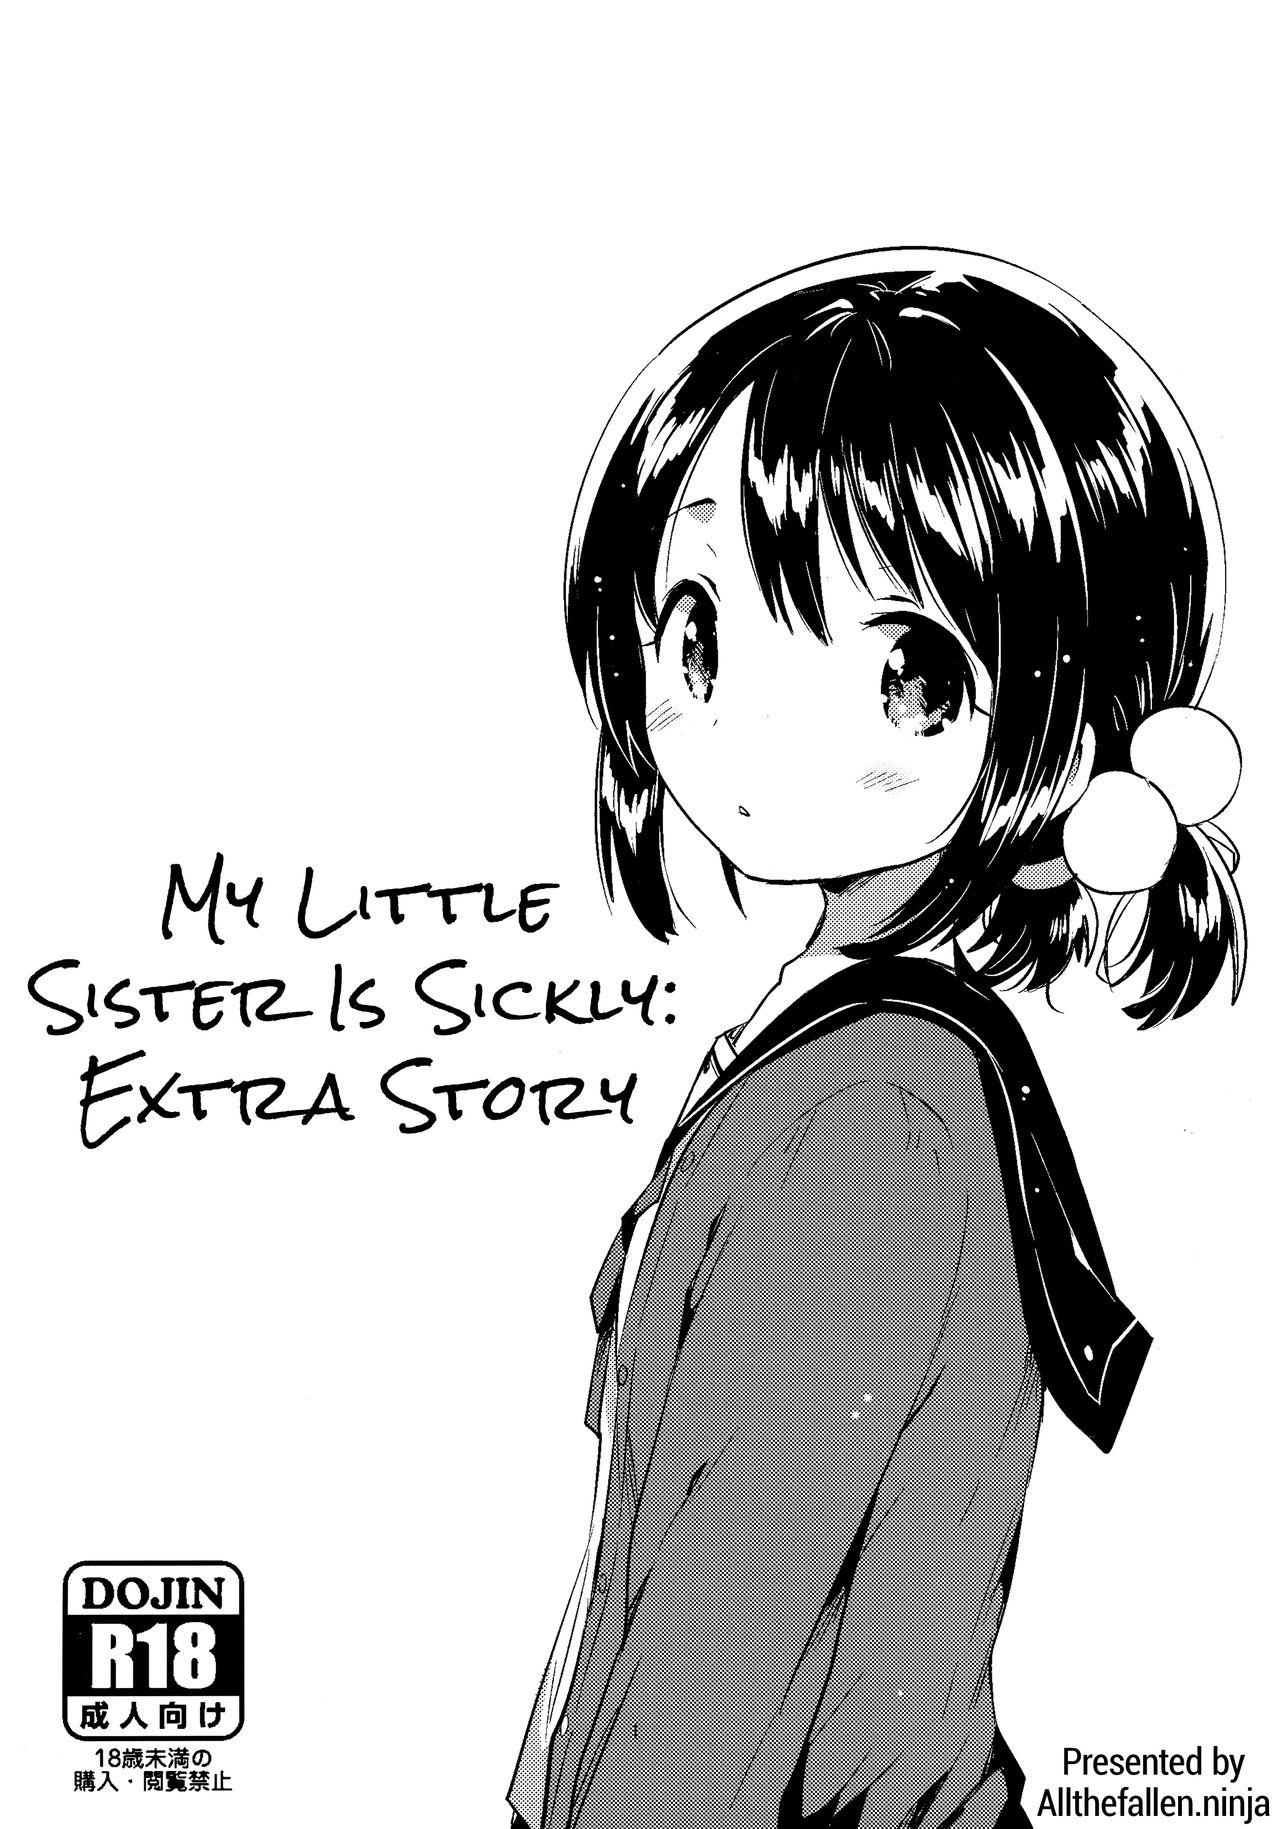 Imouto wa Sickness no Omake | My Little Sister is Sickly: Extra Story 0